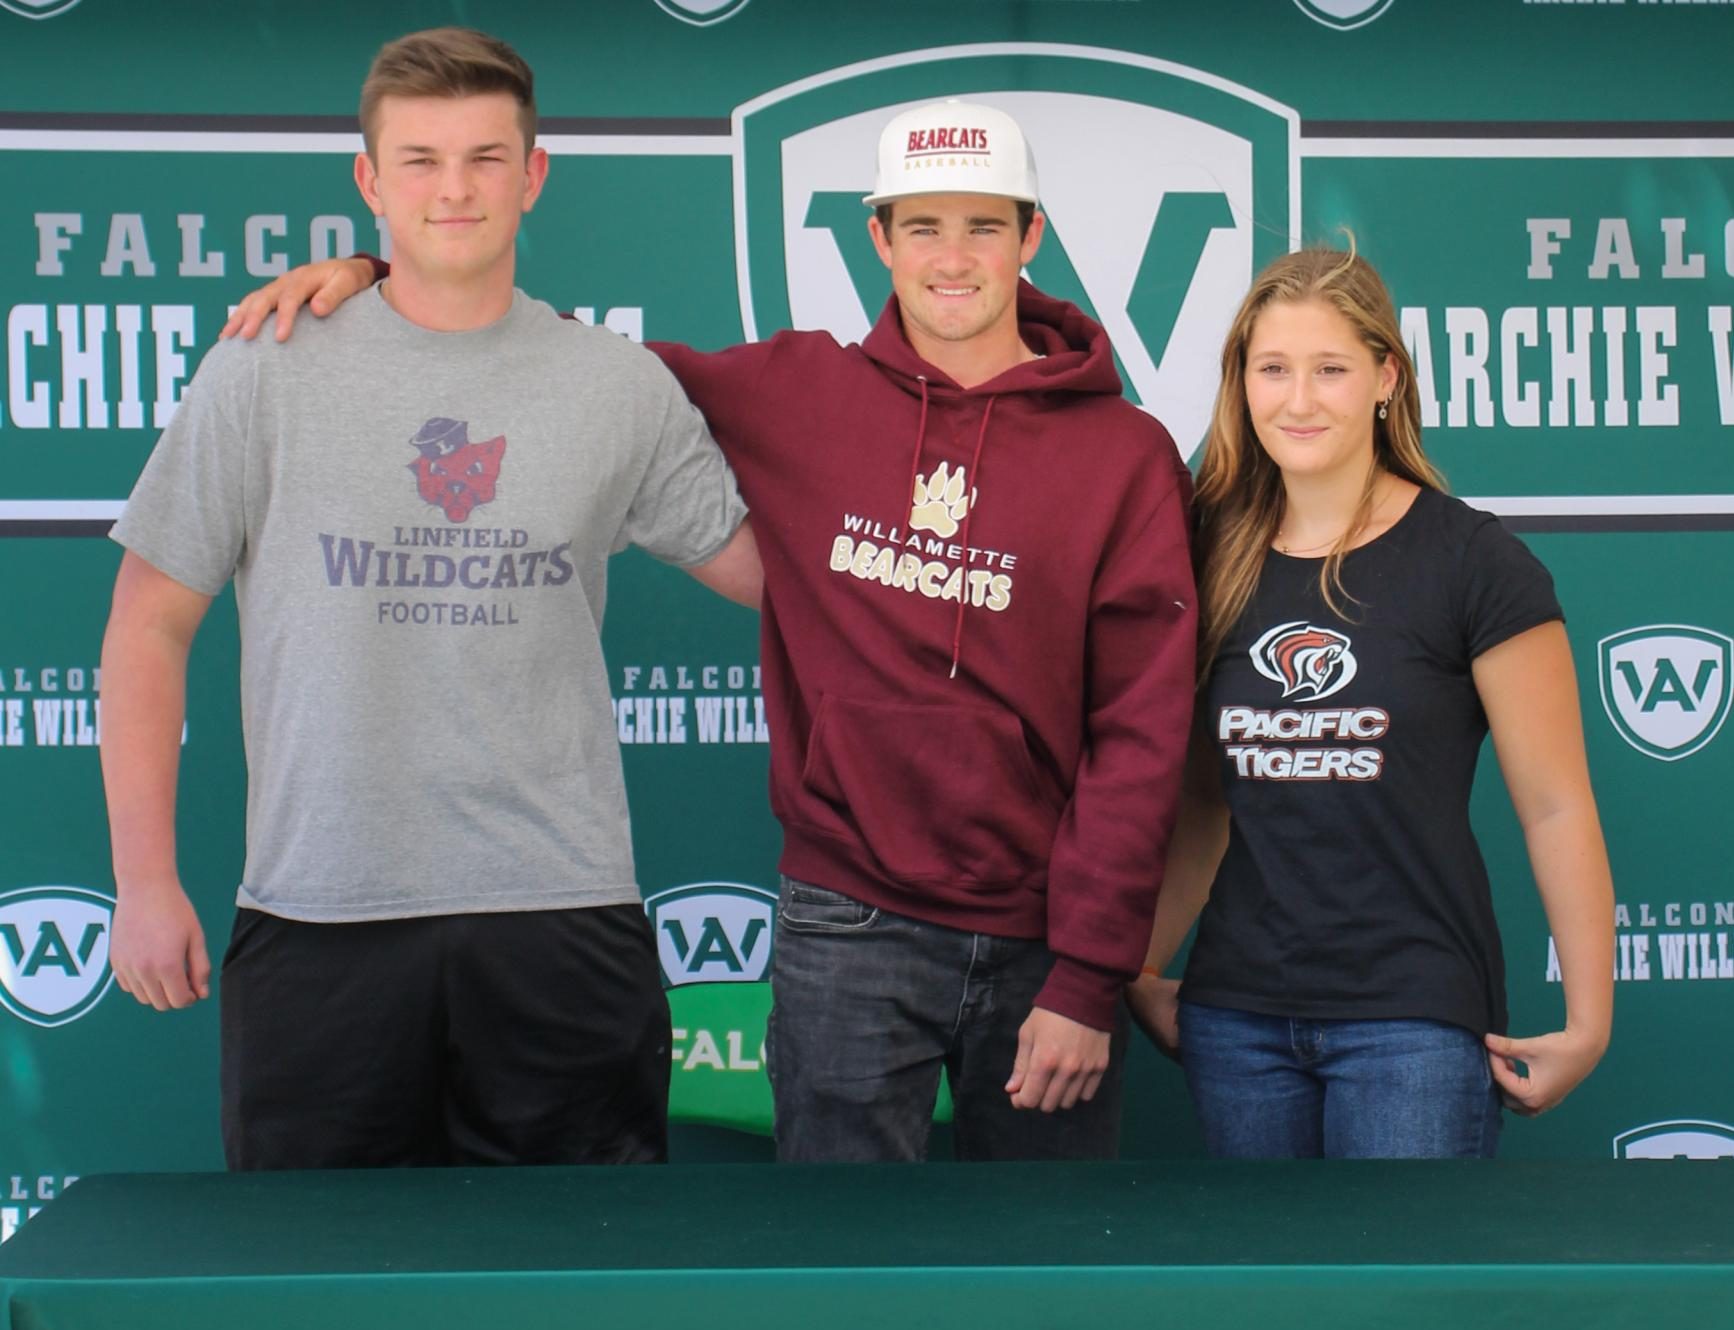 All three newly signed athletes pose together May 9 on signing day.